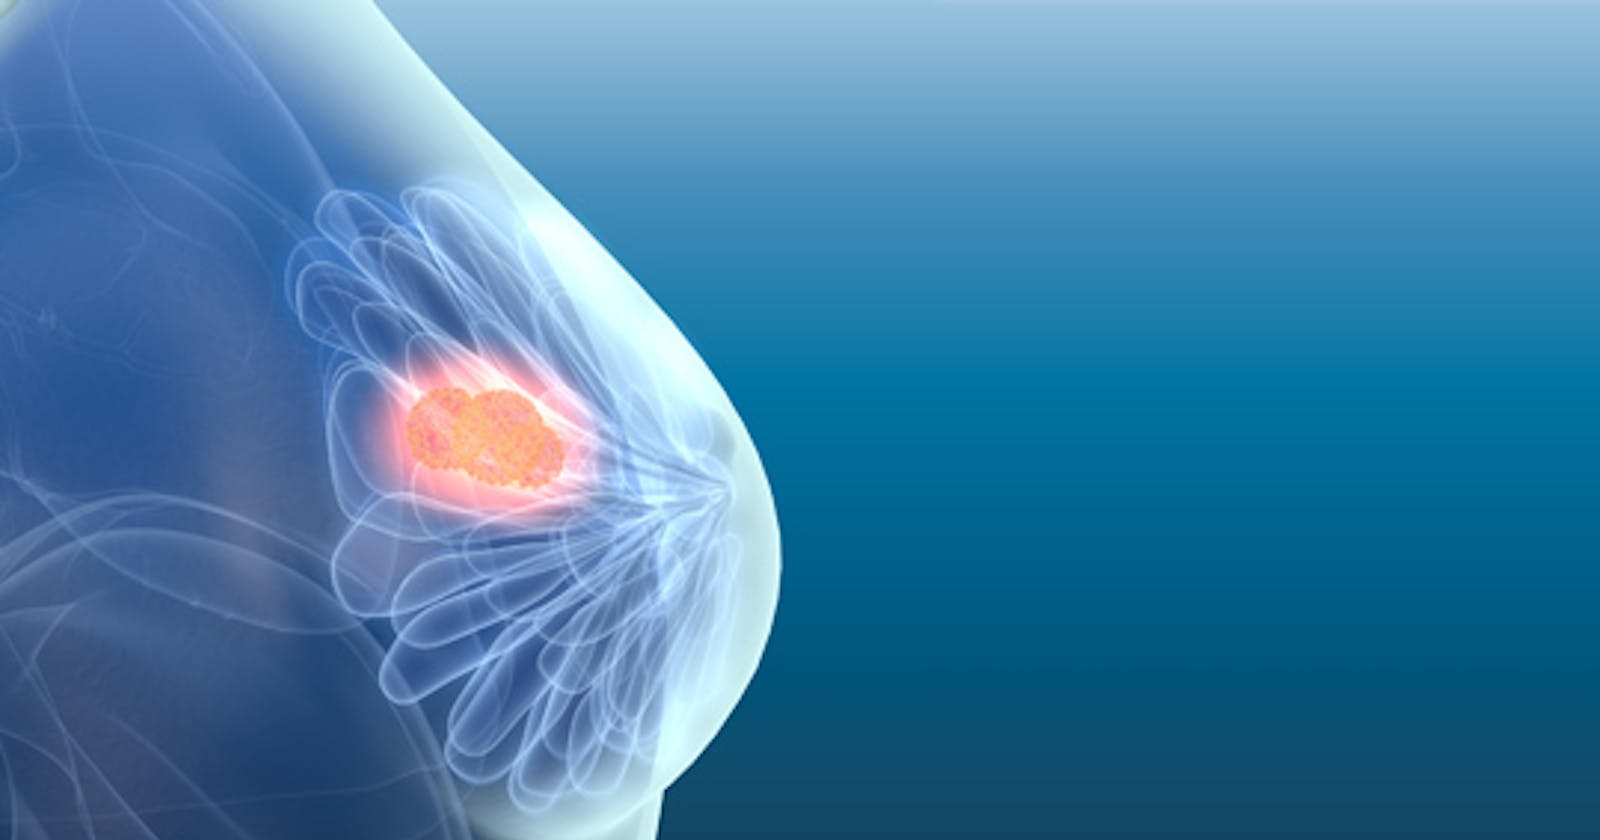 Machine Learning web-app to breast cancer diagnosis II